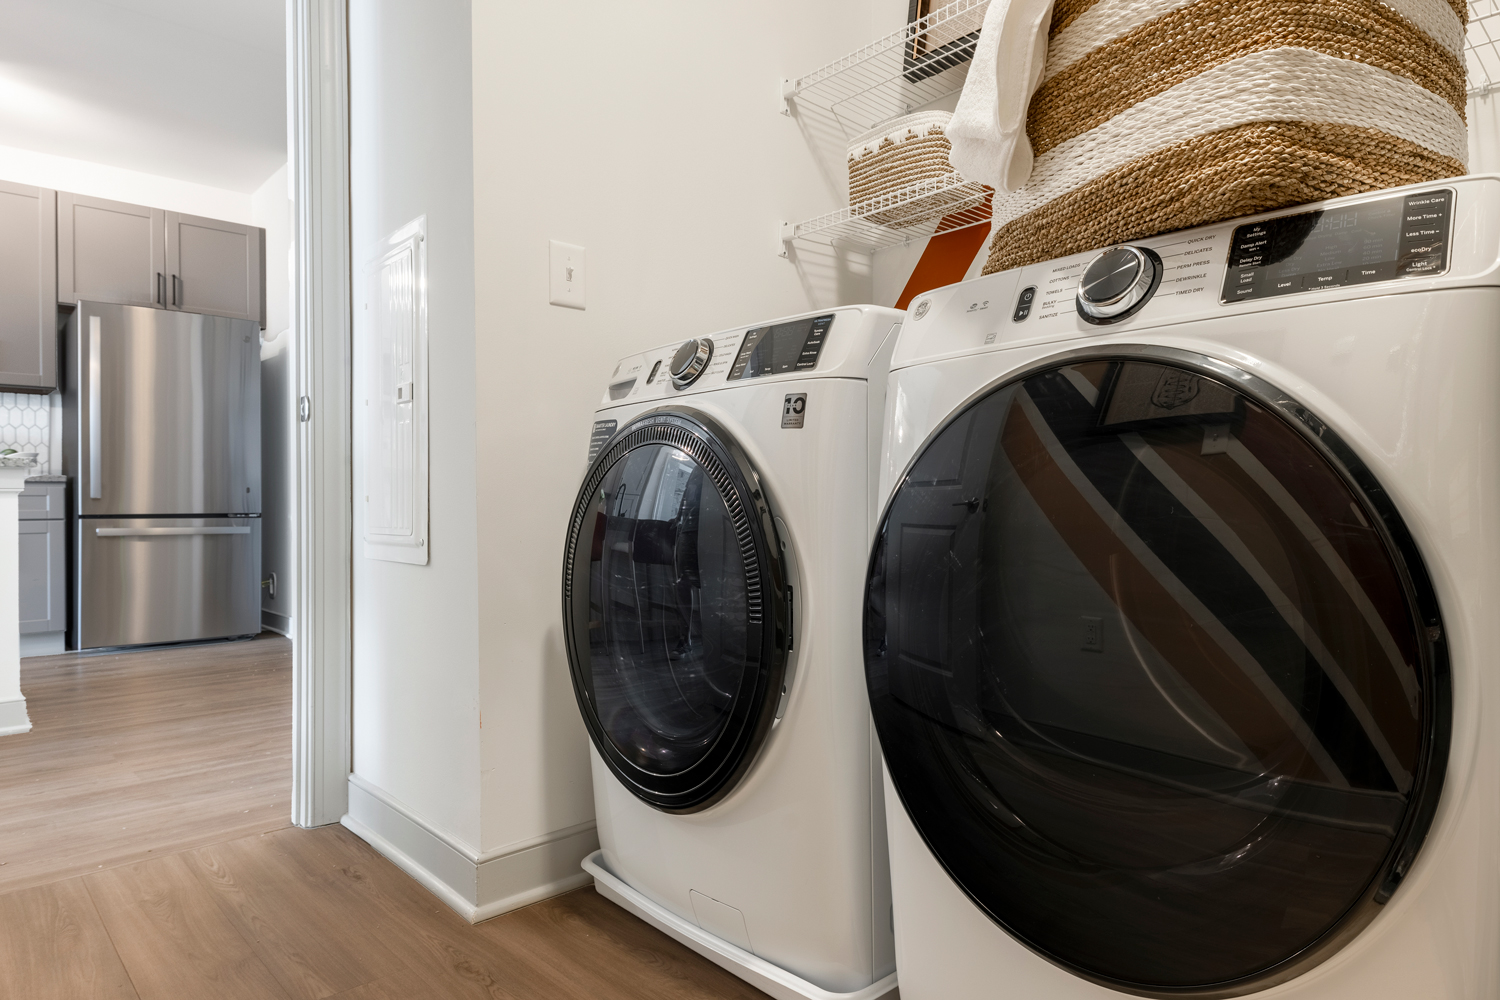 Large washer and dryer in laundry room